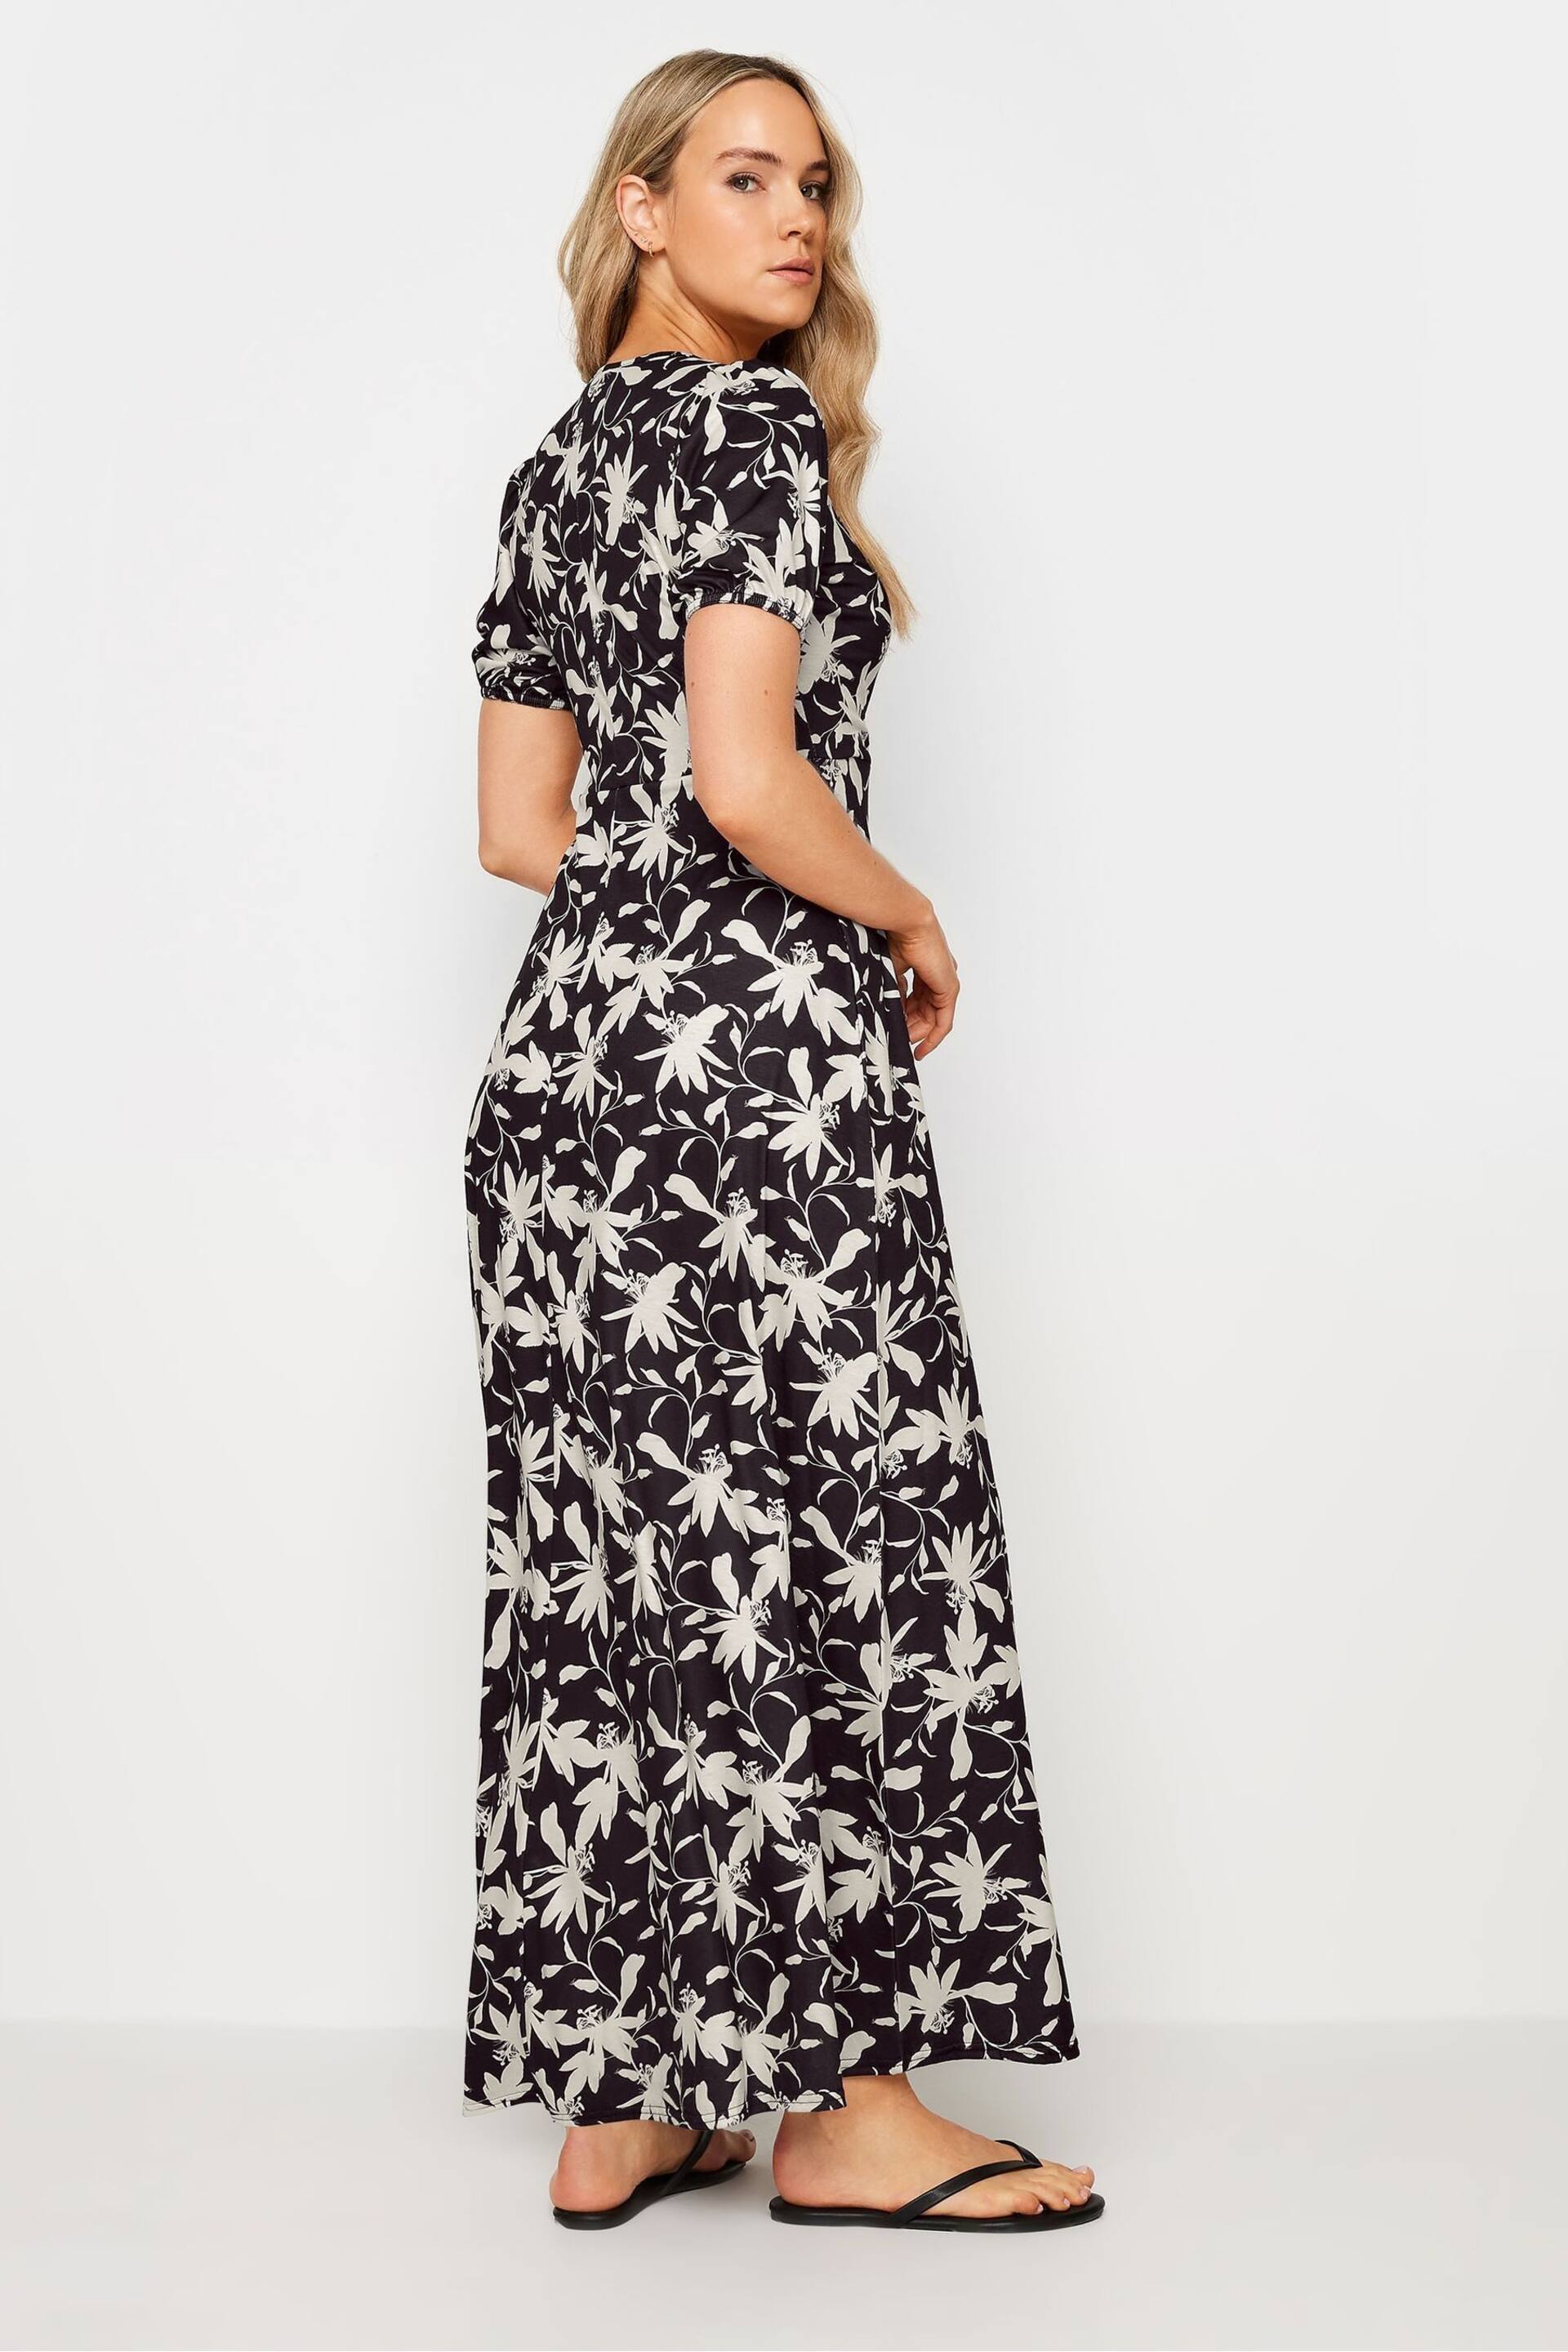 Long Tall Sally Black Floral Wrap Maxi Dress - Image 3 of 5